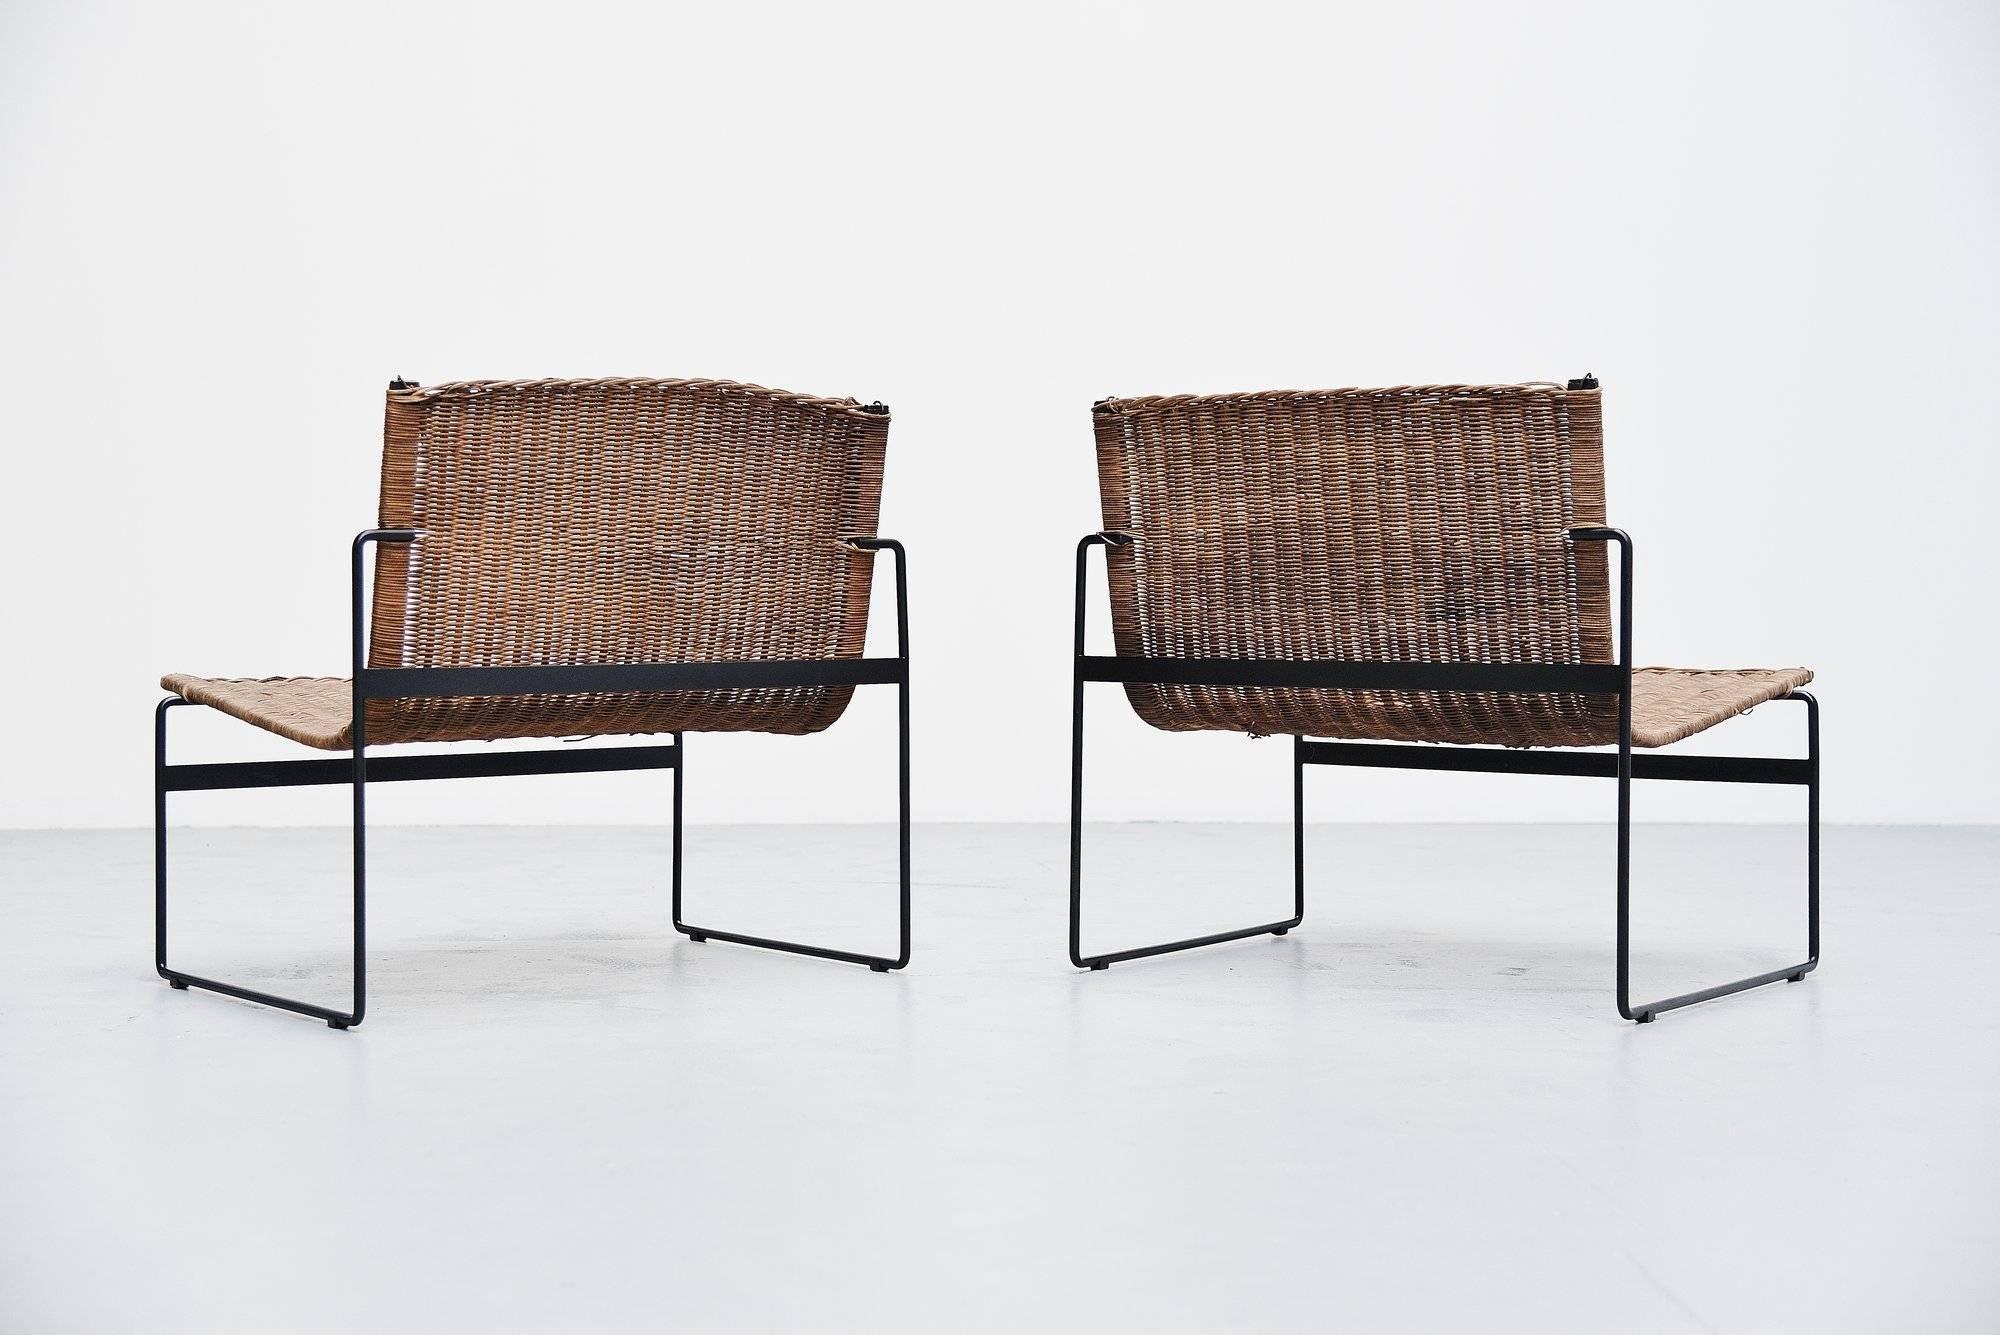 Super rare pair of light weighted lounge chairs designed by Gregorio Vicente Cortes and Luis Onsurbe and distributed by Metz & Co, Holland 1961. These rare Spanish chairs have a black painted metal frame and wicker seat. The wicker has a very nice